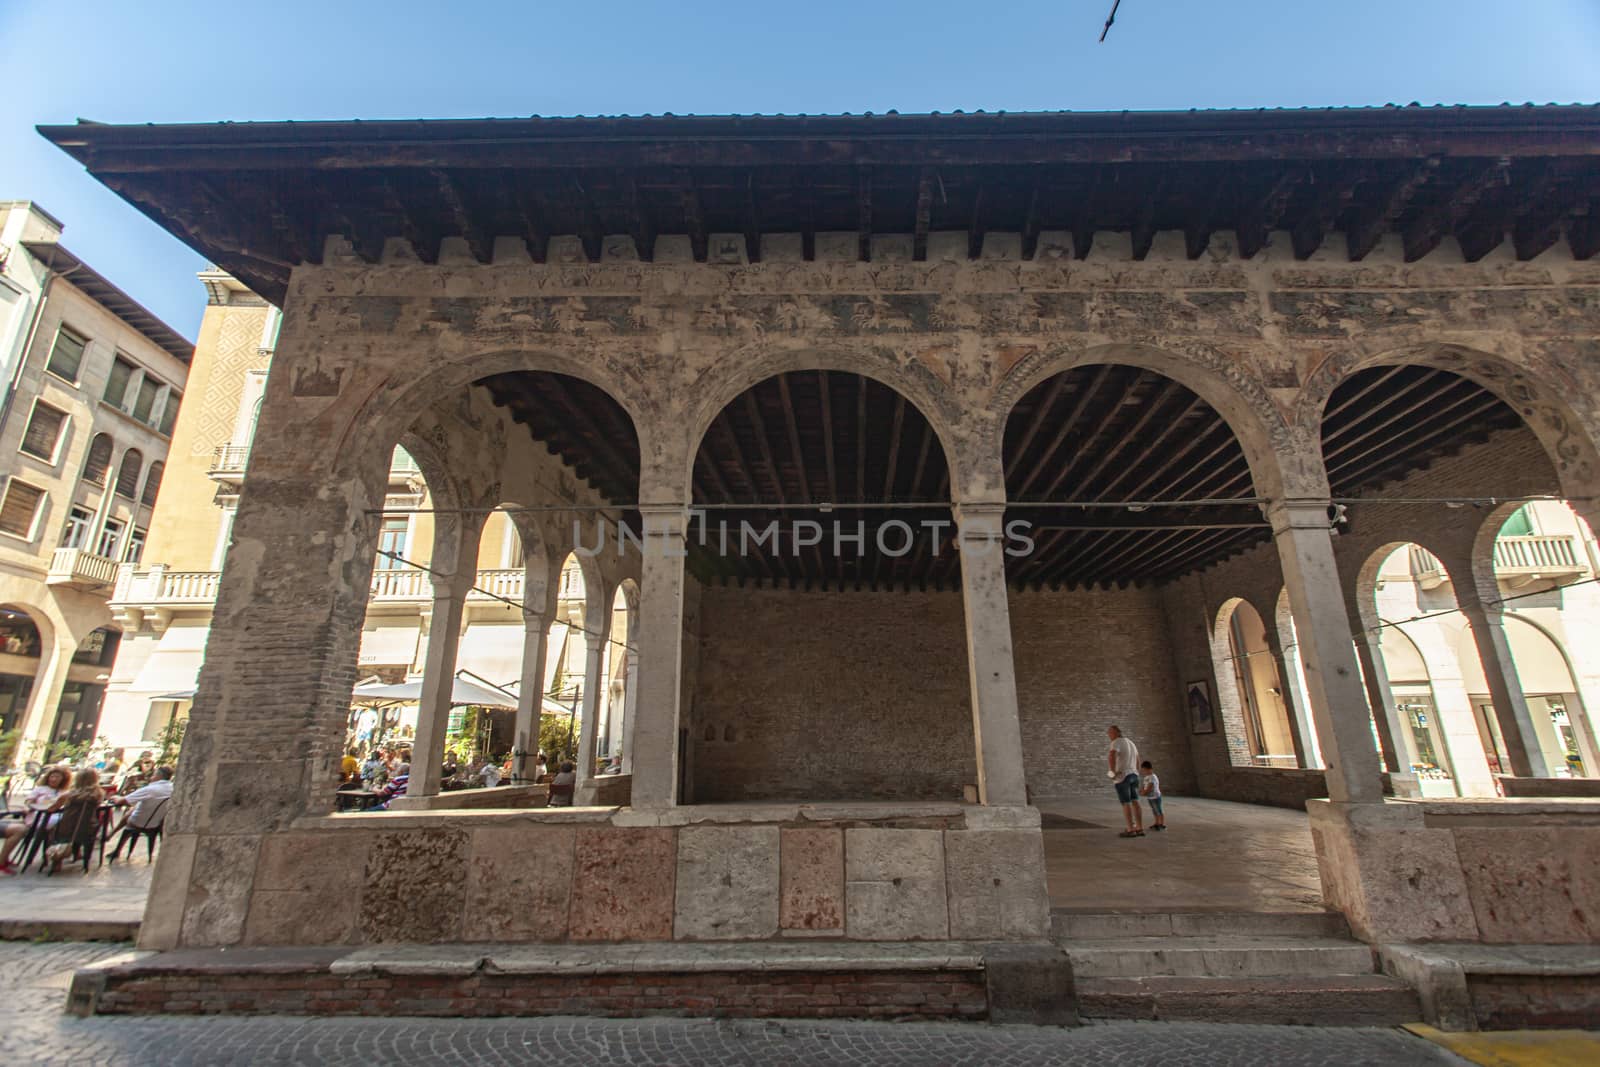 TREVISO, ITALY 13 AUGUST 2020: Loggia dei Cavalieri in Treviso, a famous building in the historical city centerTREVISO, ITALY 13 AUGUST 2020: Loggia dei Cavalieri in Treviso, a famous building in the historical city center